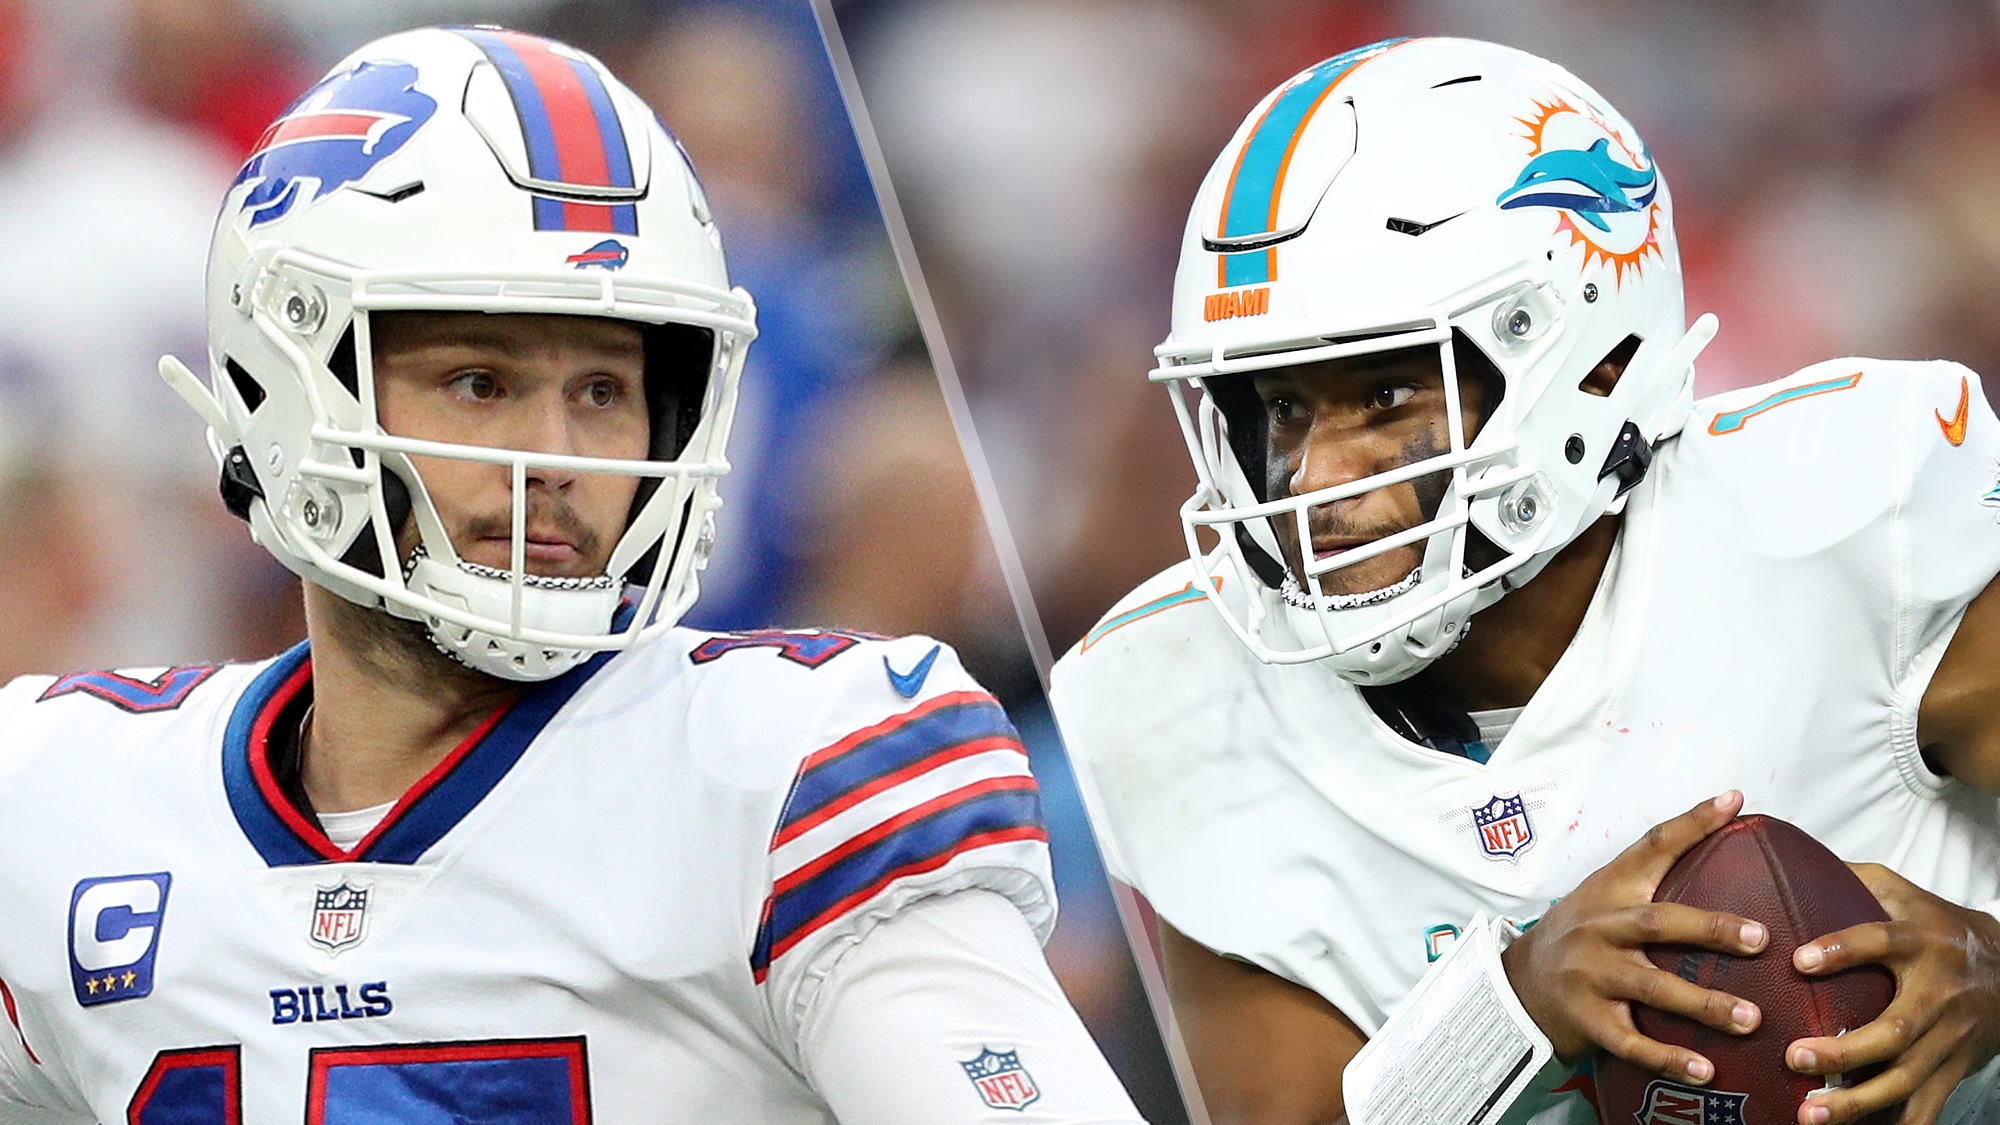 Bills vs Dolphins live stream: How to watch NFL week 2 game online